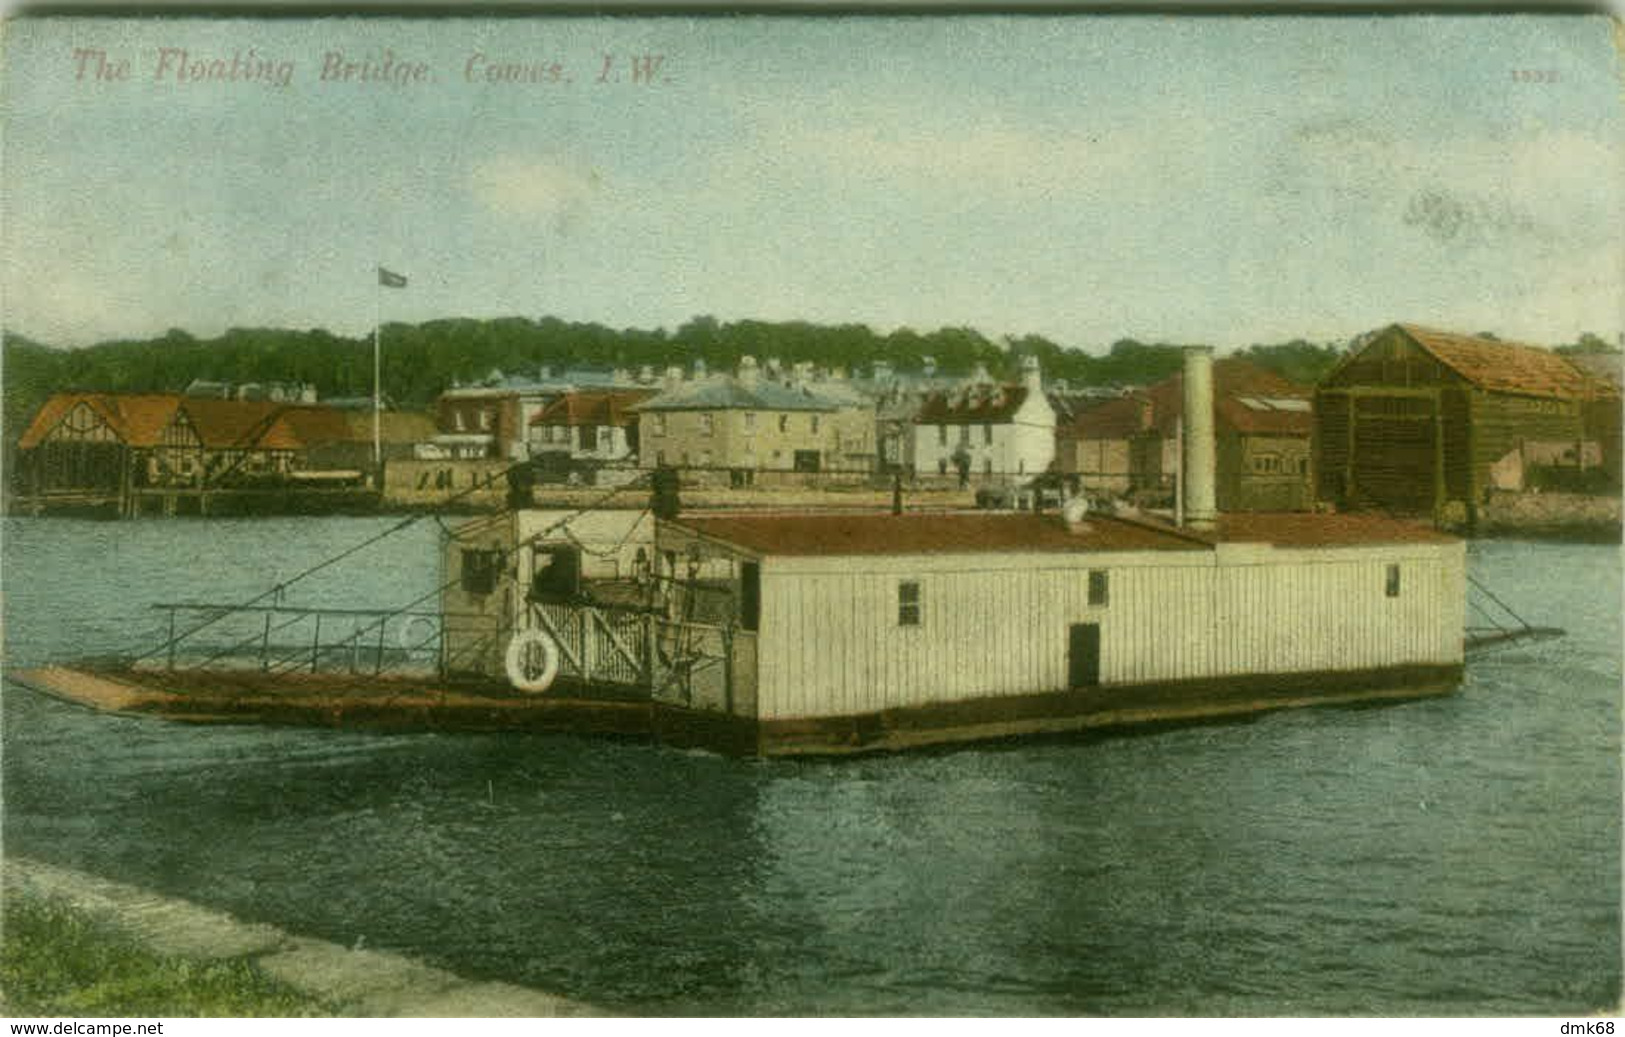 UK - THE FLOATING BRUDGE - COWES - ISLE OF WIGHT - MAILED TO ITALY 1909 (BG9934) - Cowes